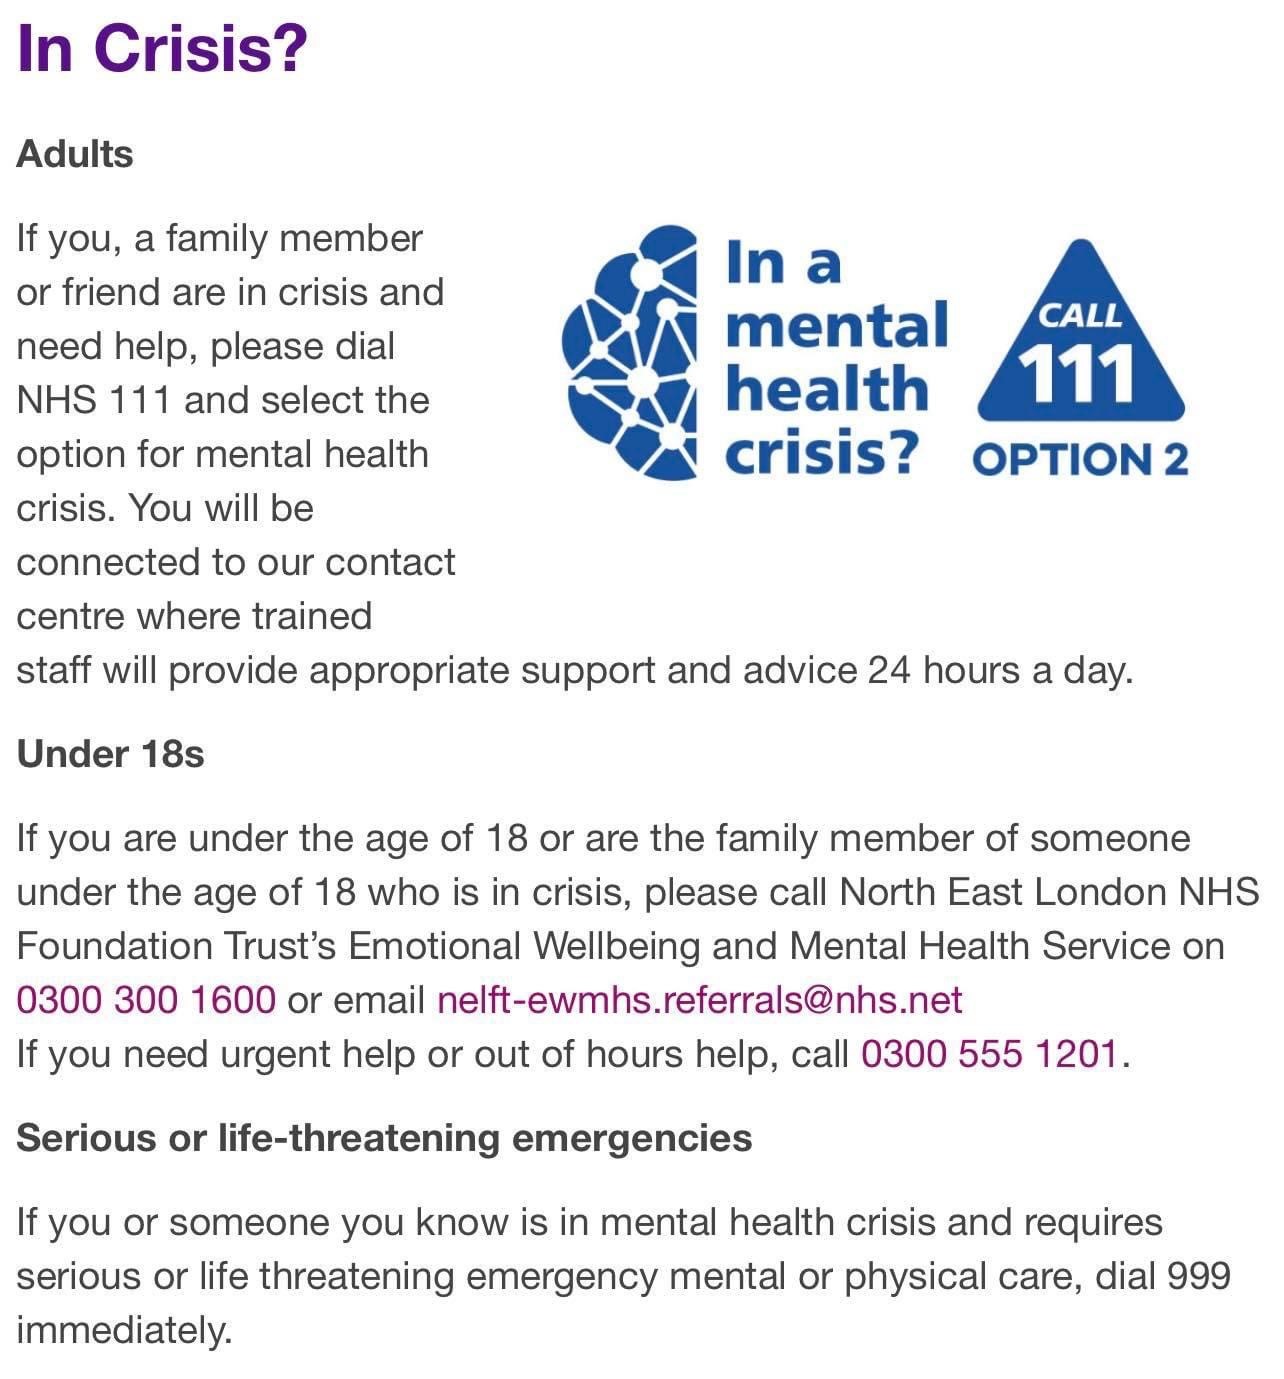 Information showing instructions for dialing 111 and selecting option for MH if you or a friend are in crisis